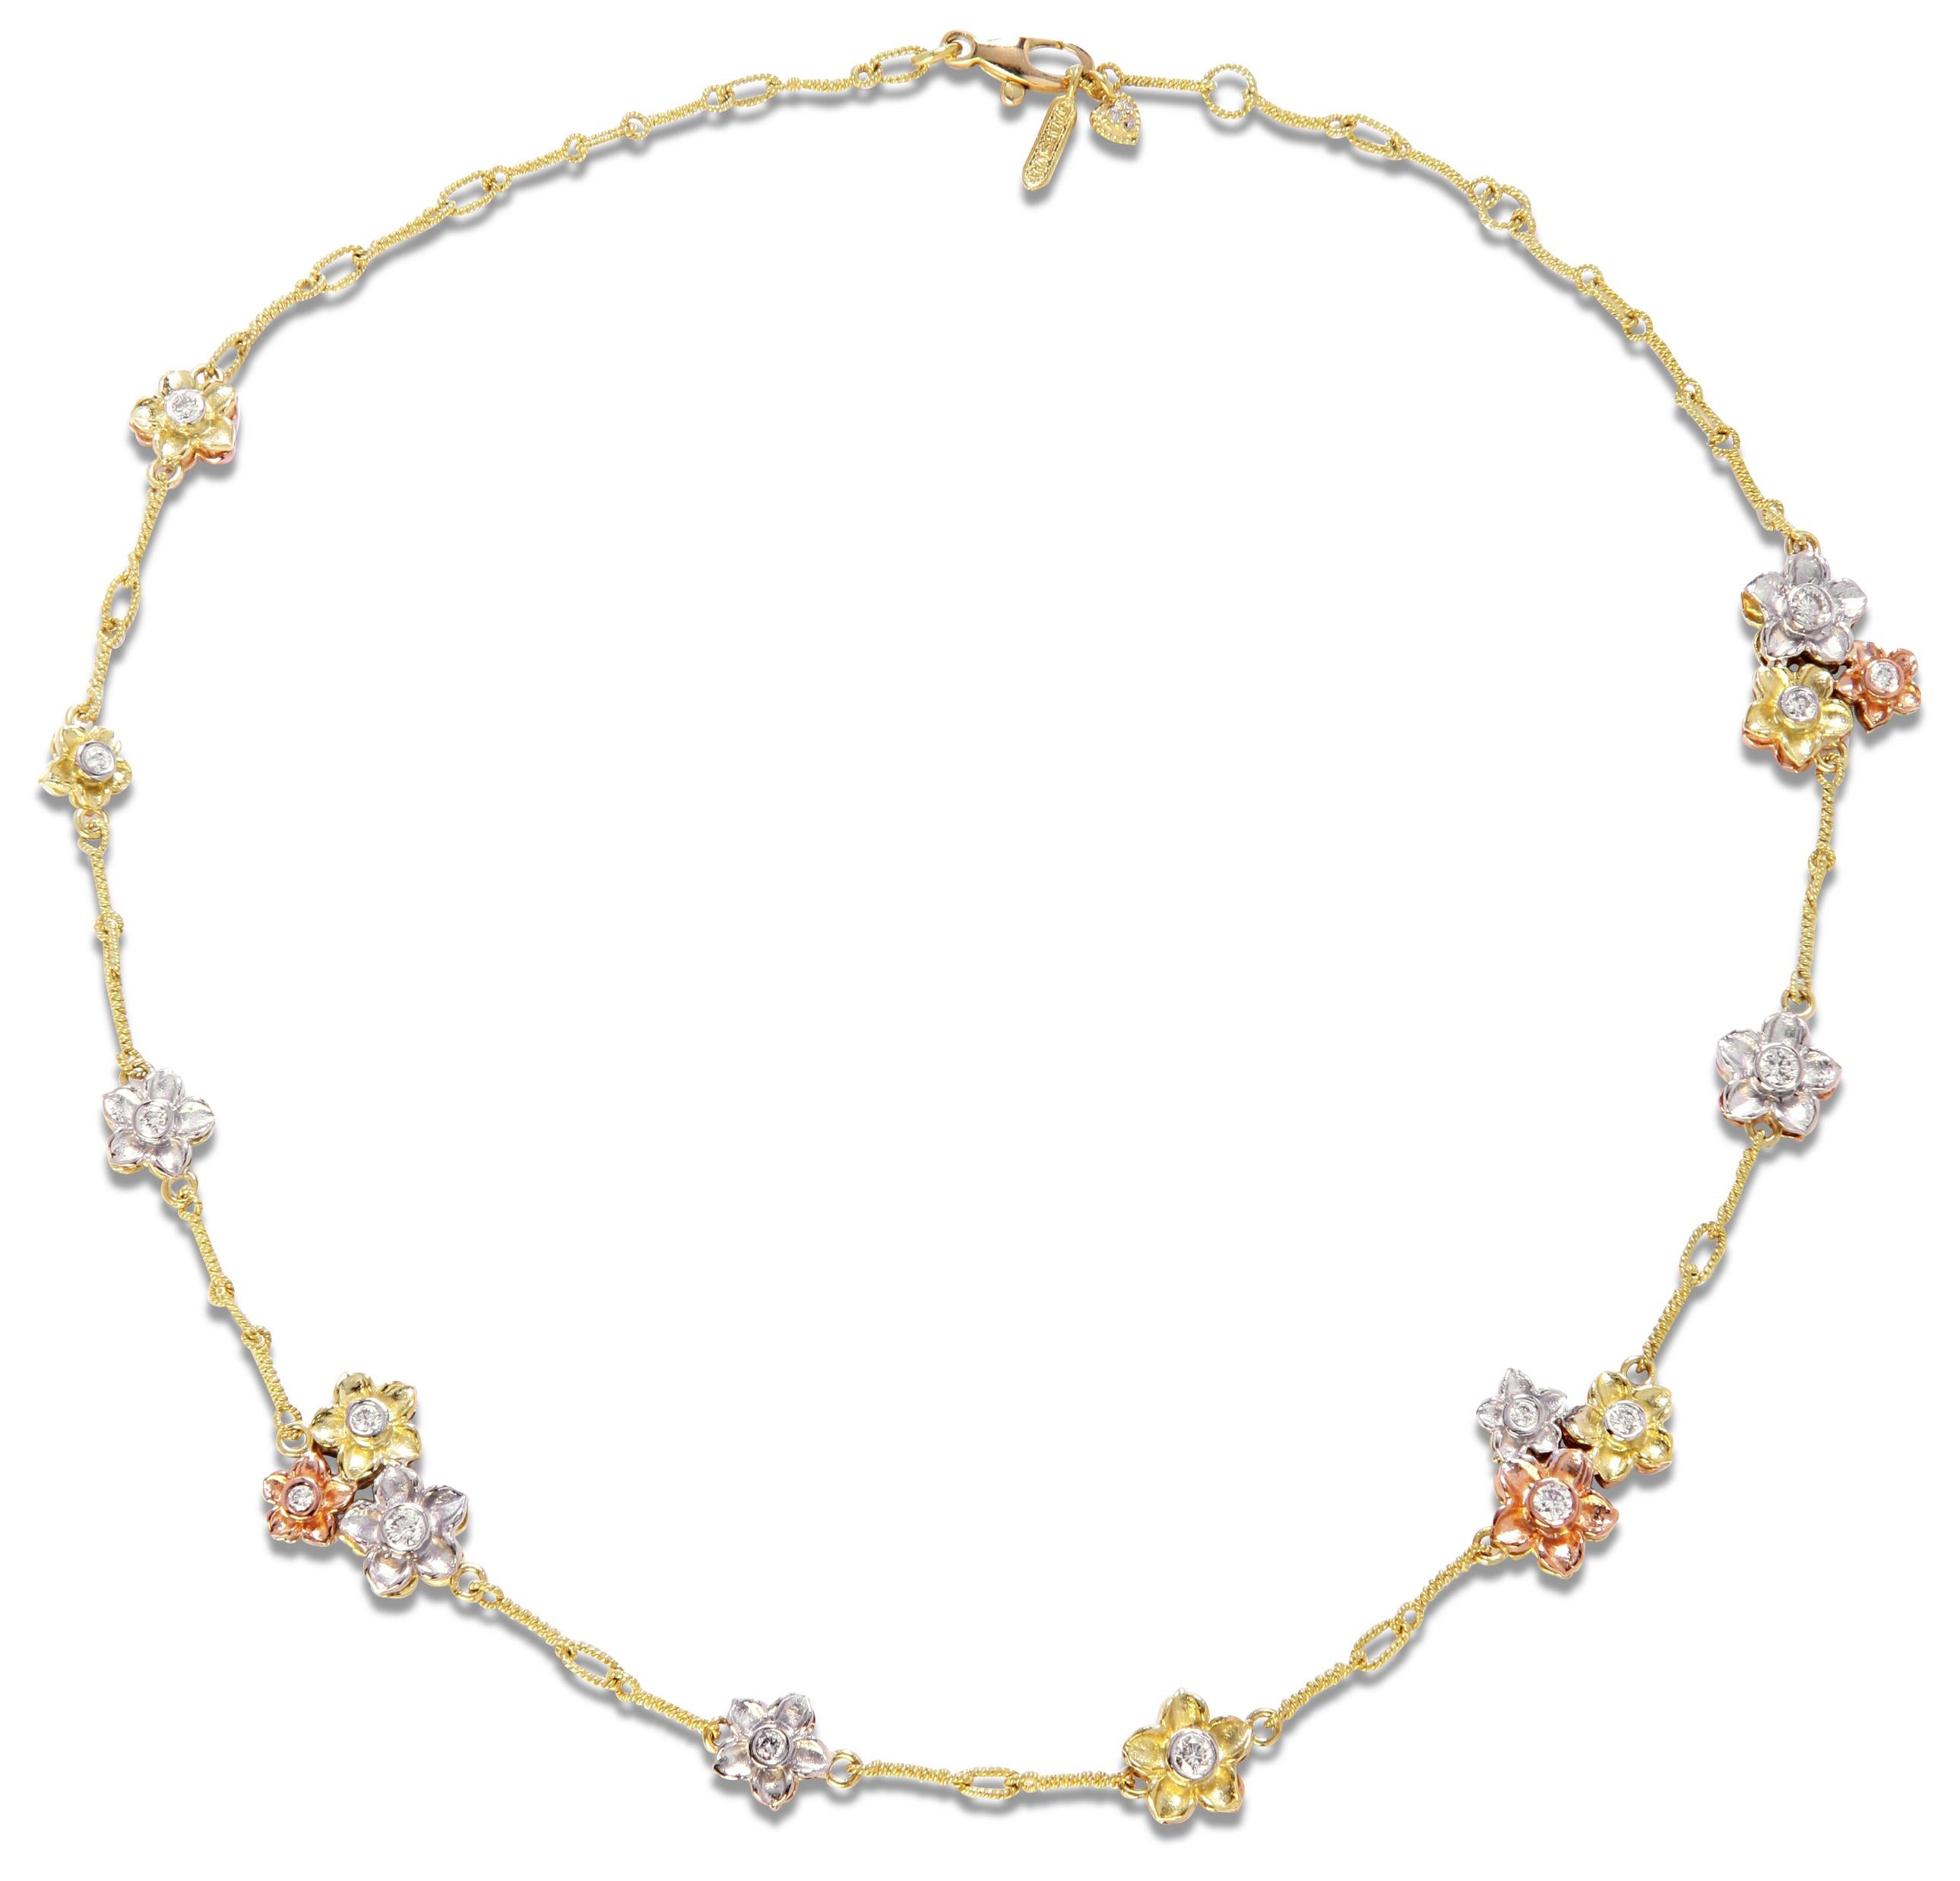 18K Tri-Color Yellow White Rose Gold and Diamond Floral Chain Necklace by Stambolian

This truly remarkable necklace features diamonds set on both sides of necklace. The gold colors also change on the reverse side which makes this necklace very